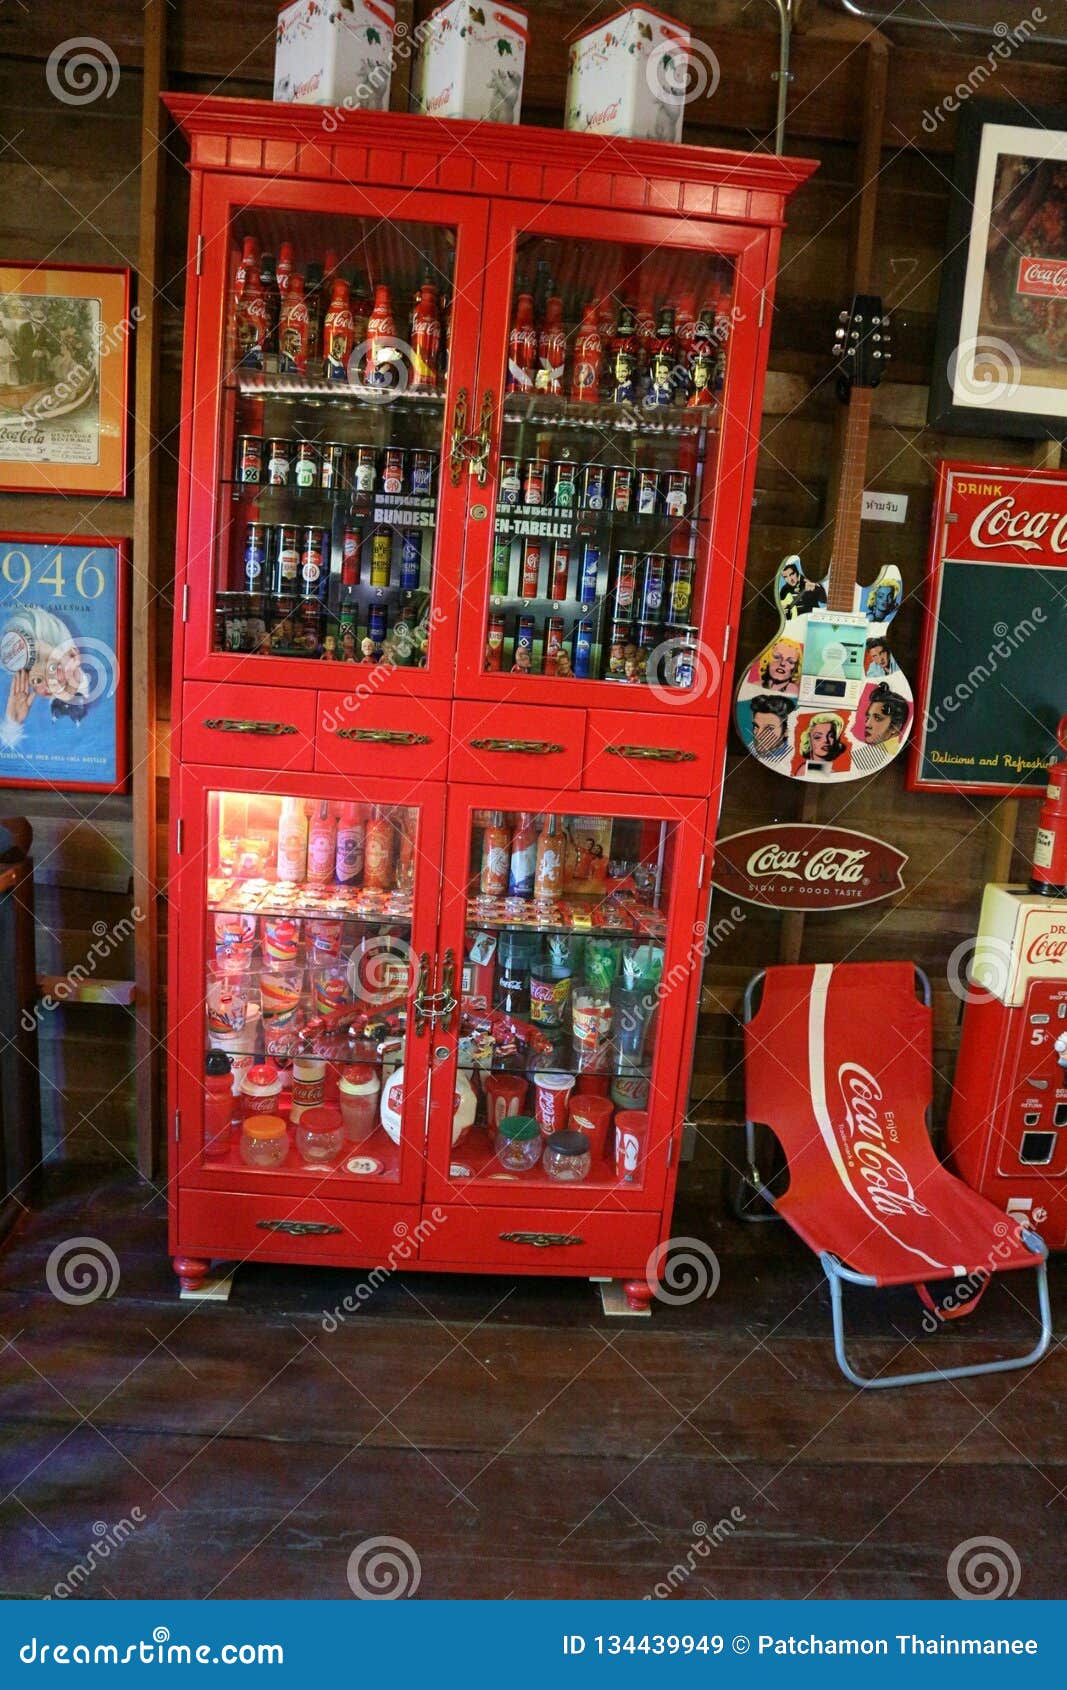 Coke In A Beautiful Red Cabinet Is Located On A Wooden Floor